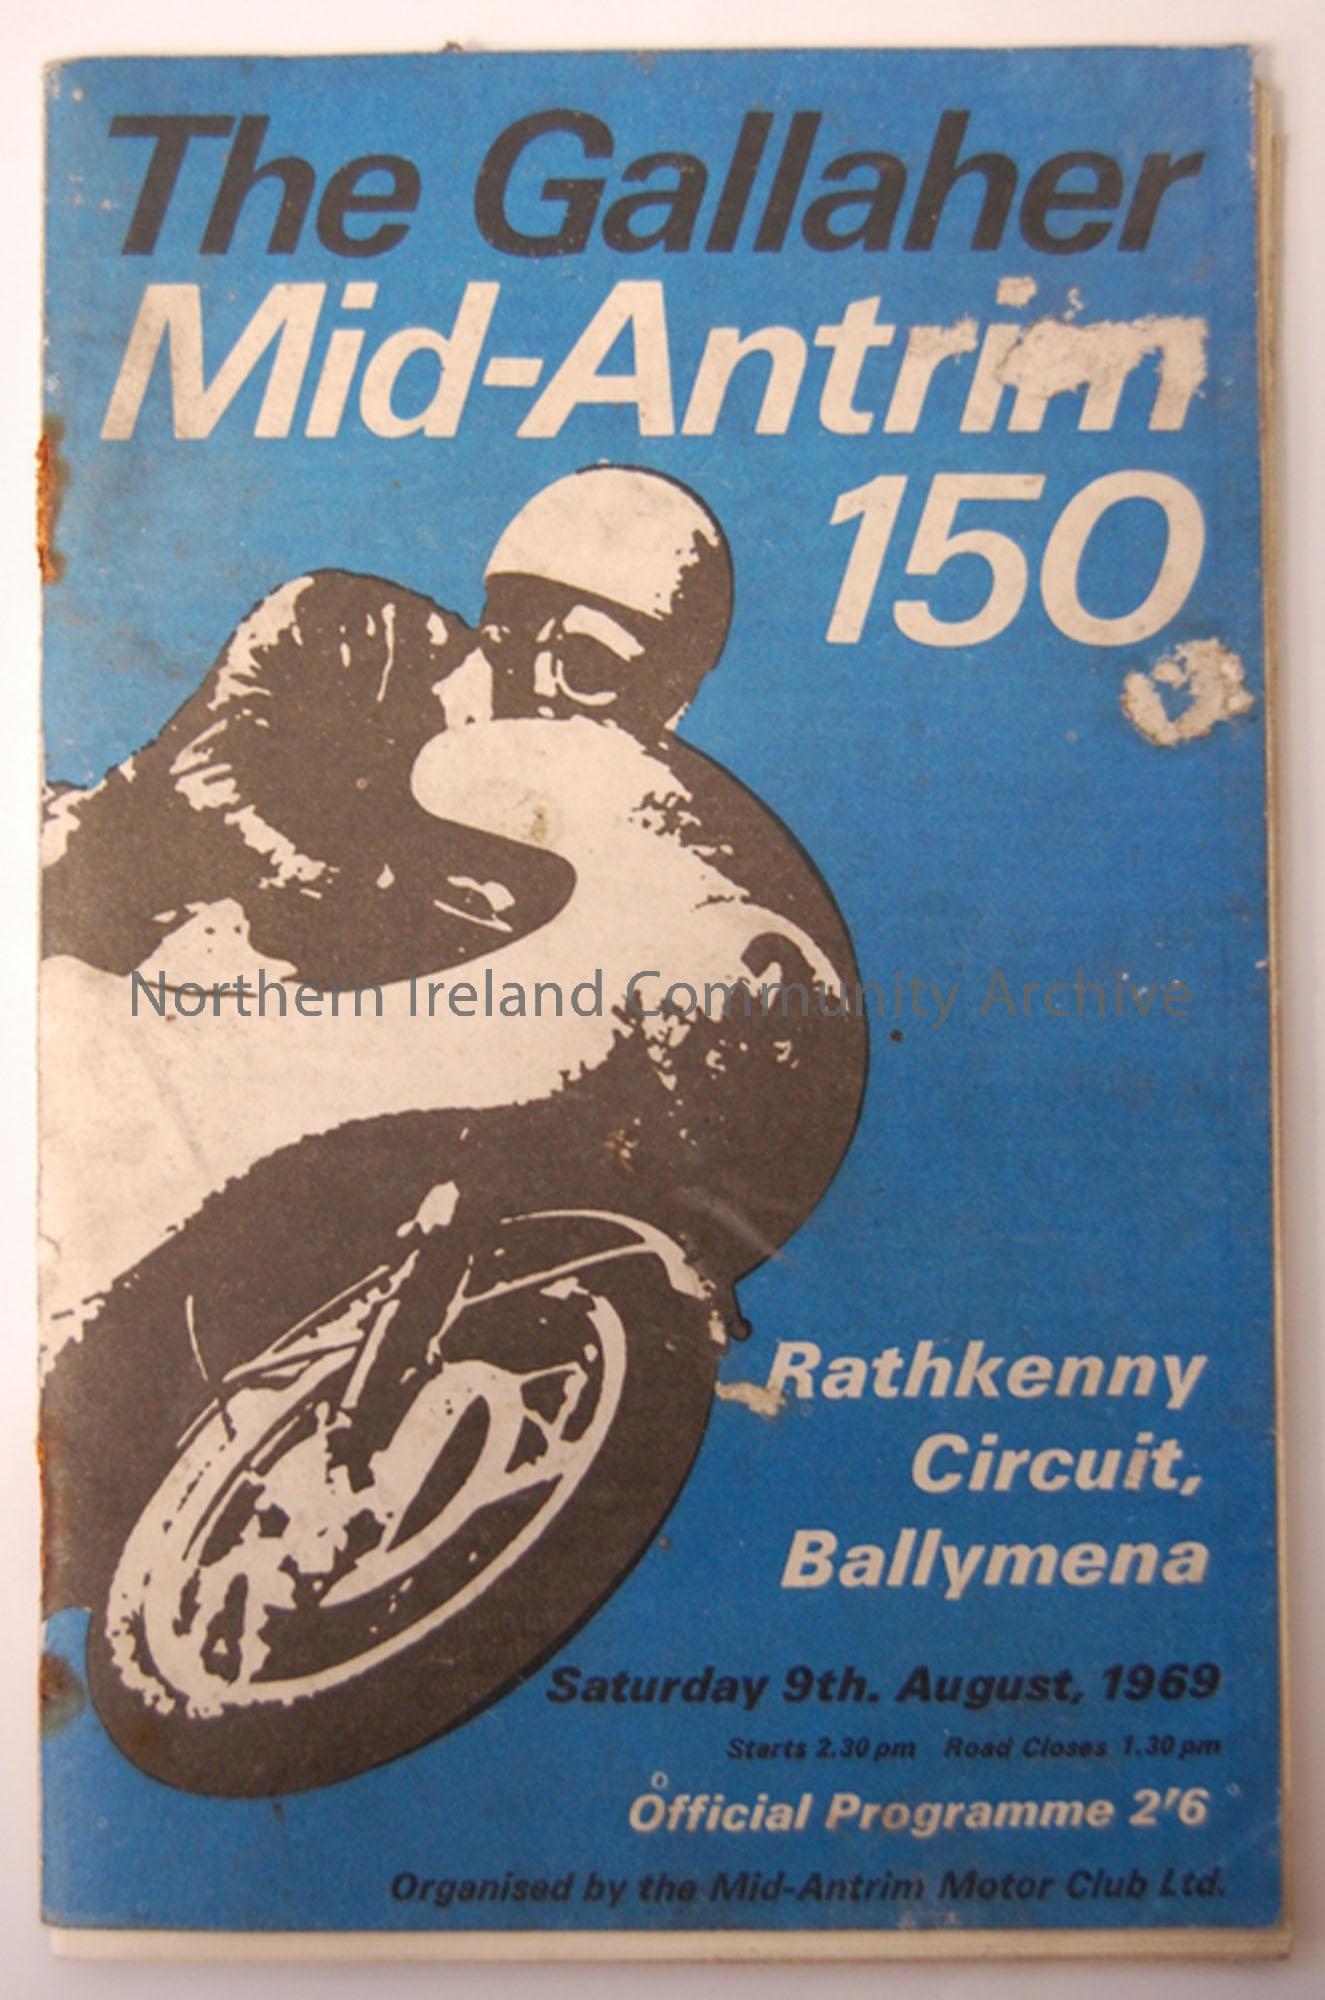 The Gallagher Mid-Antrim ‘150’ Motorcycle road race, Saturday 9th August 1969, starting at 2.30pm, Rathkenny circuit, Ballymena.